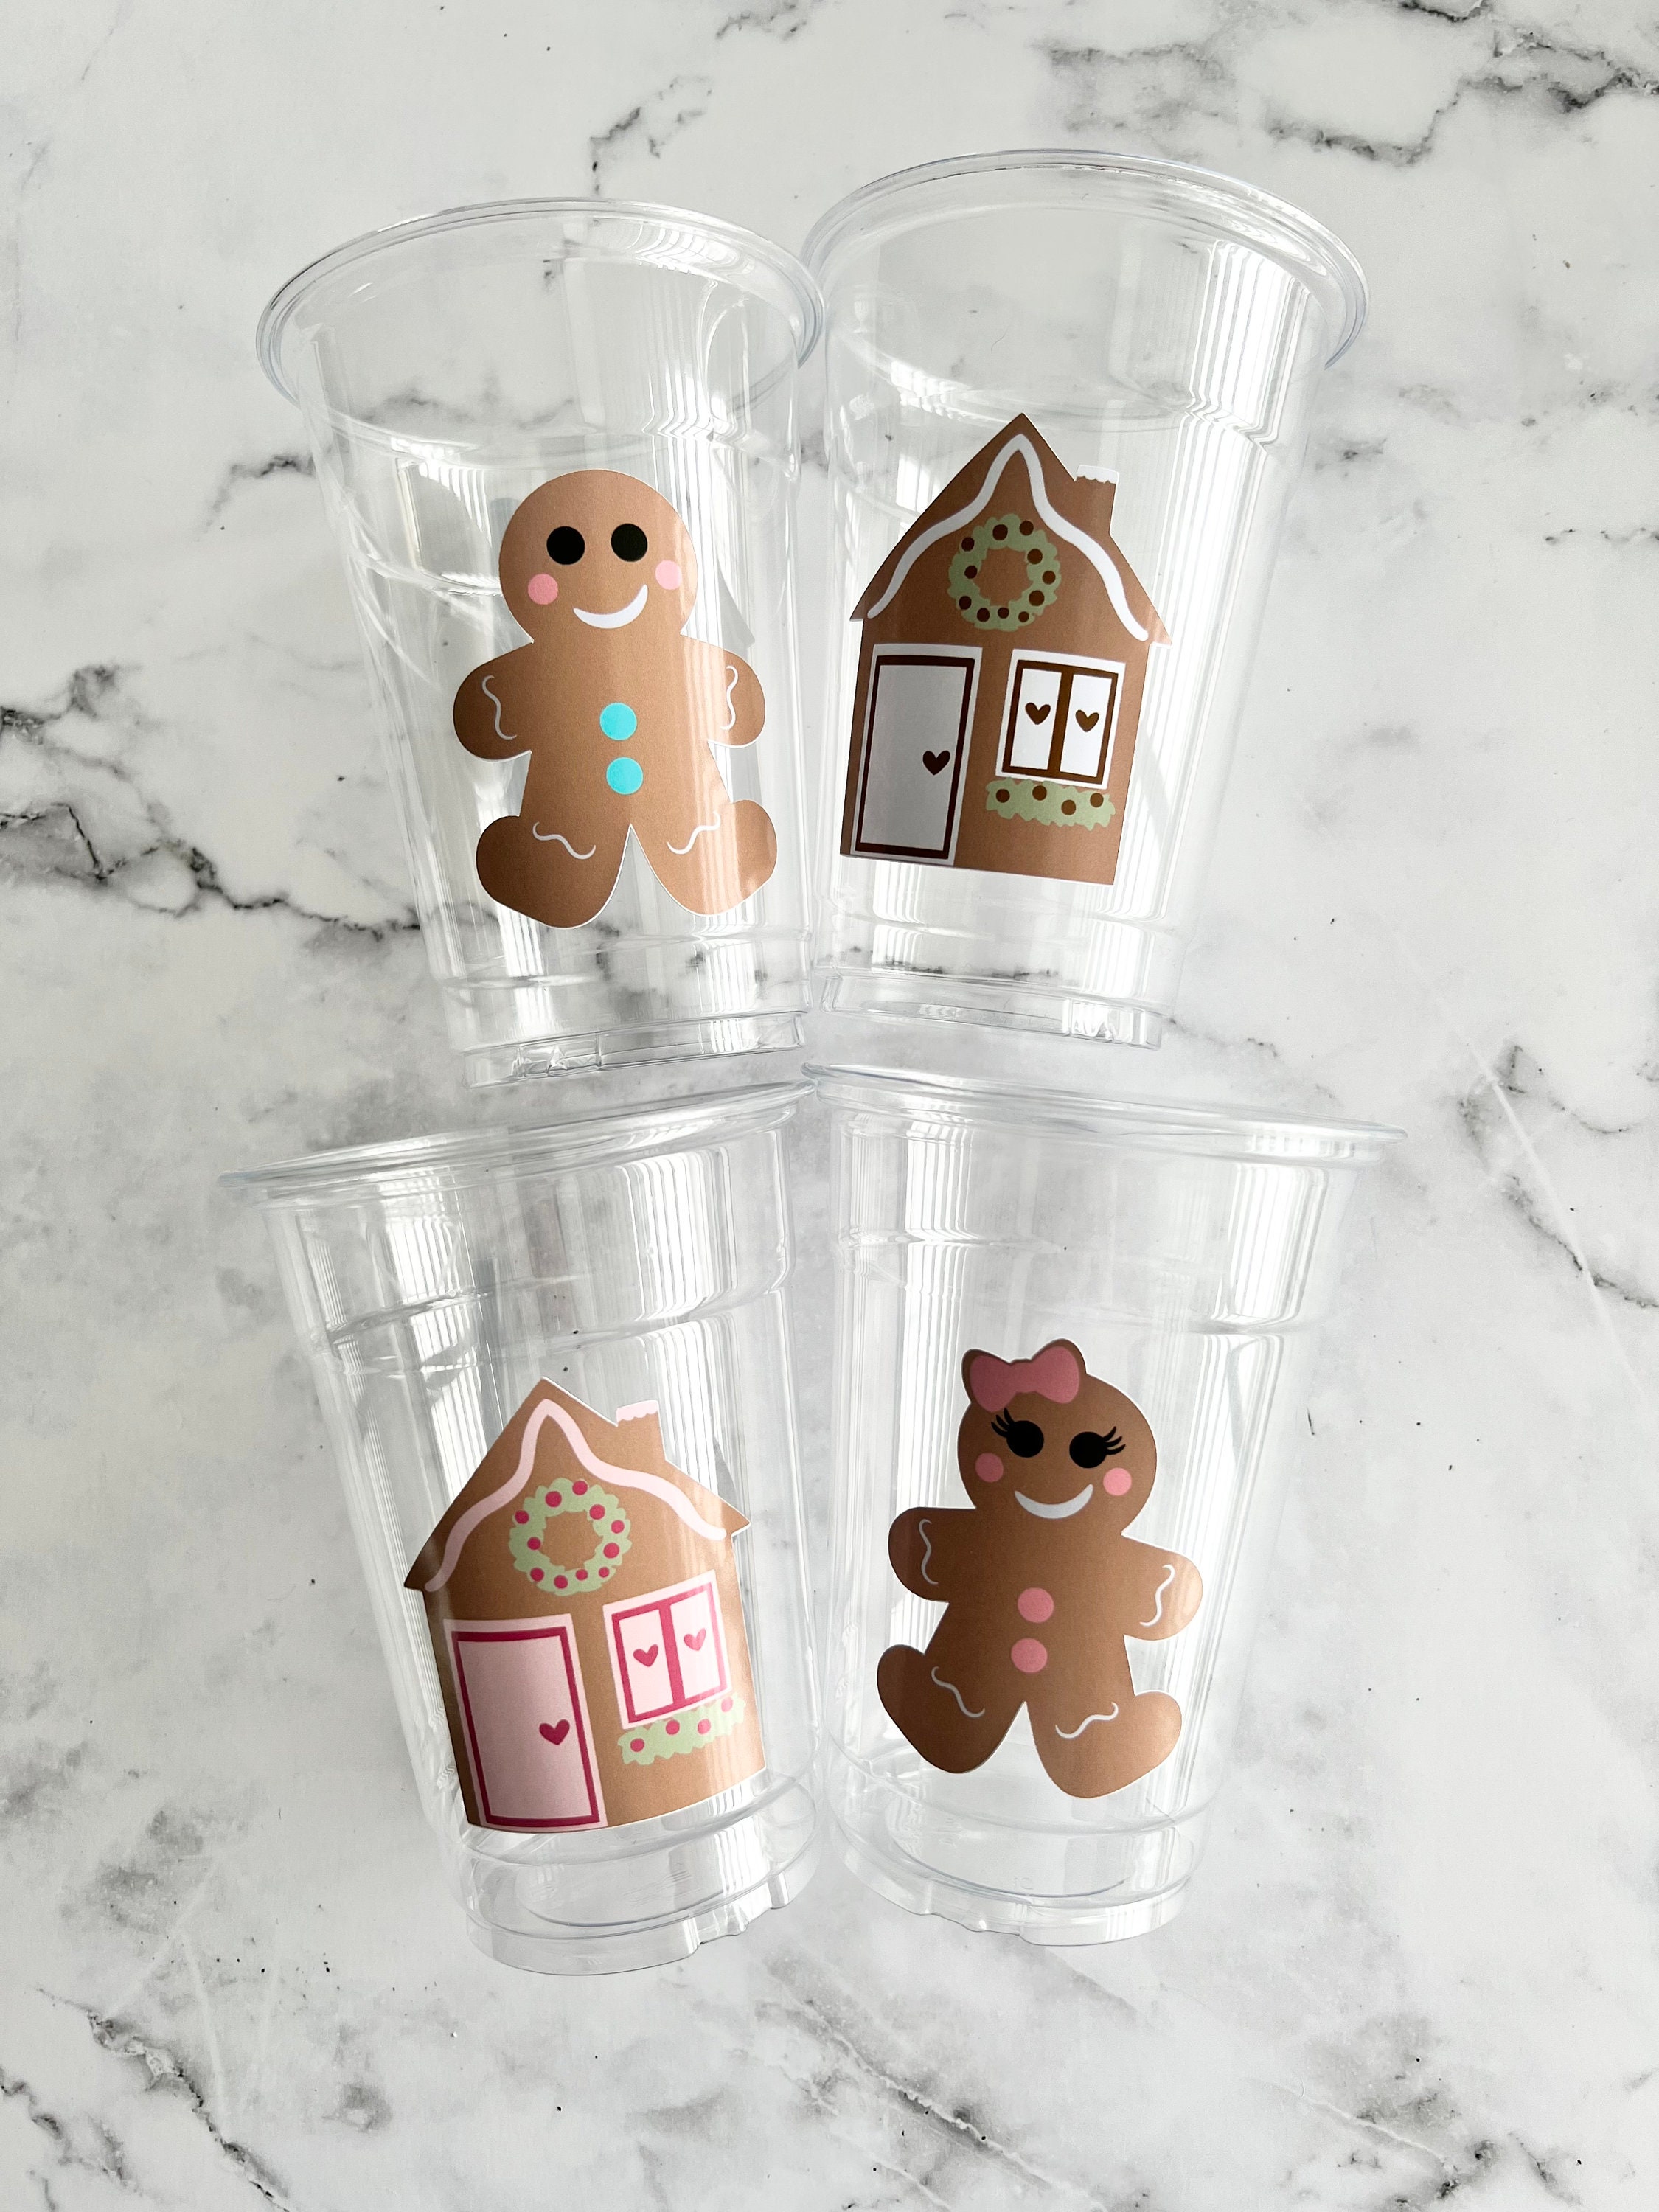 24 Disposable Christmas Gingerbread Party Cups 7 Oz 24 and 7 Paper Scallop  Shaped Saucer Plates Set…See more 24 Disposable Christmas Gingerbread